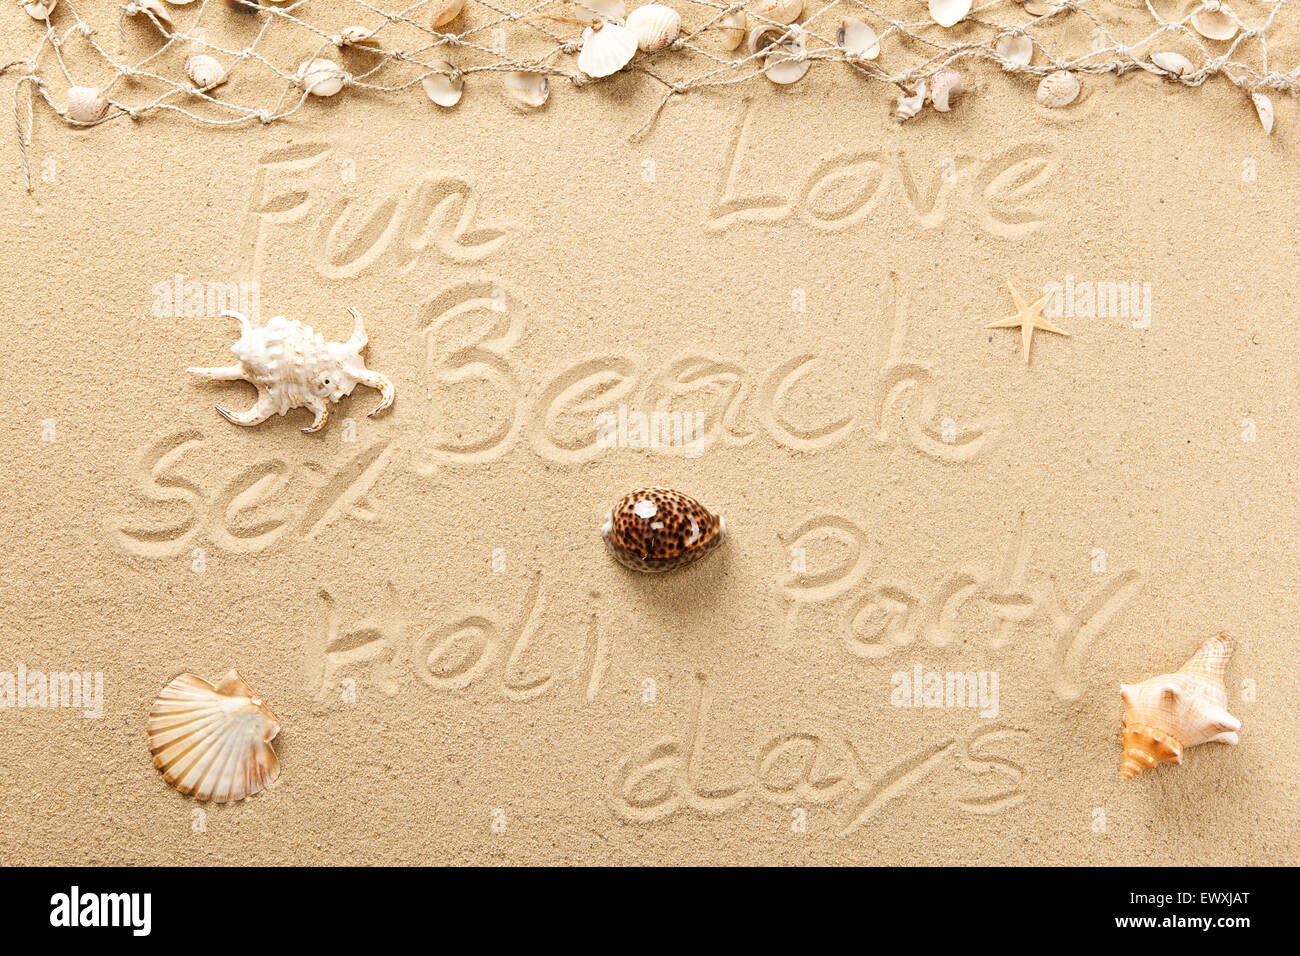 Holiday keywords in the sand Stock Photo